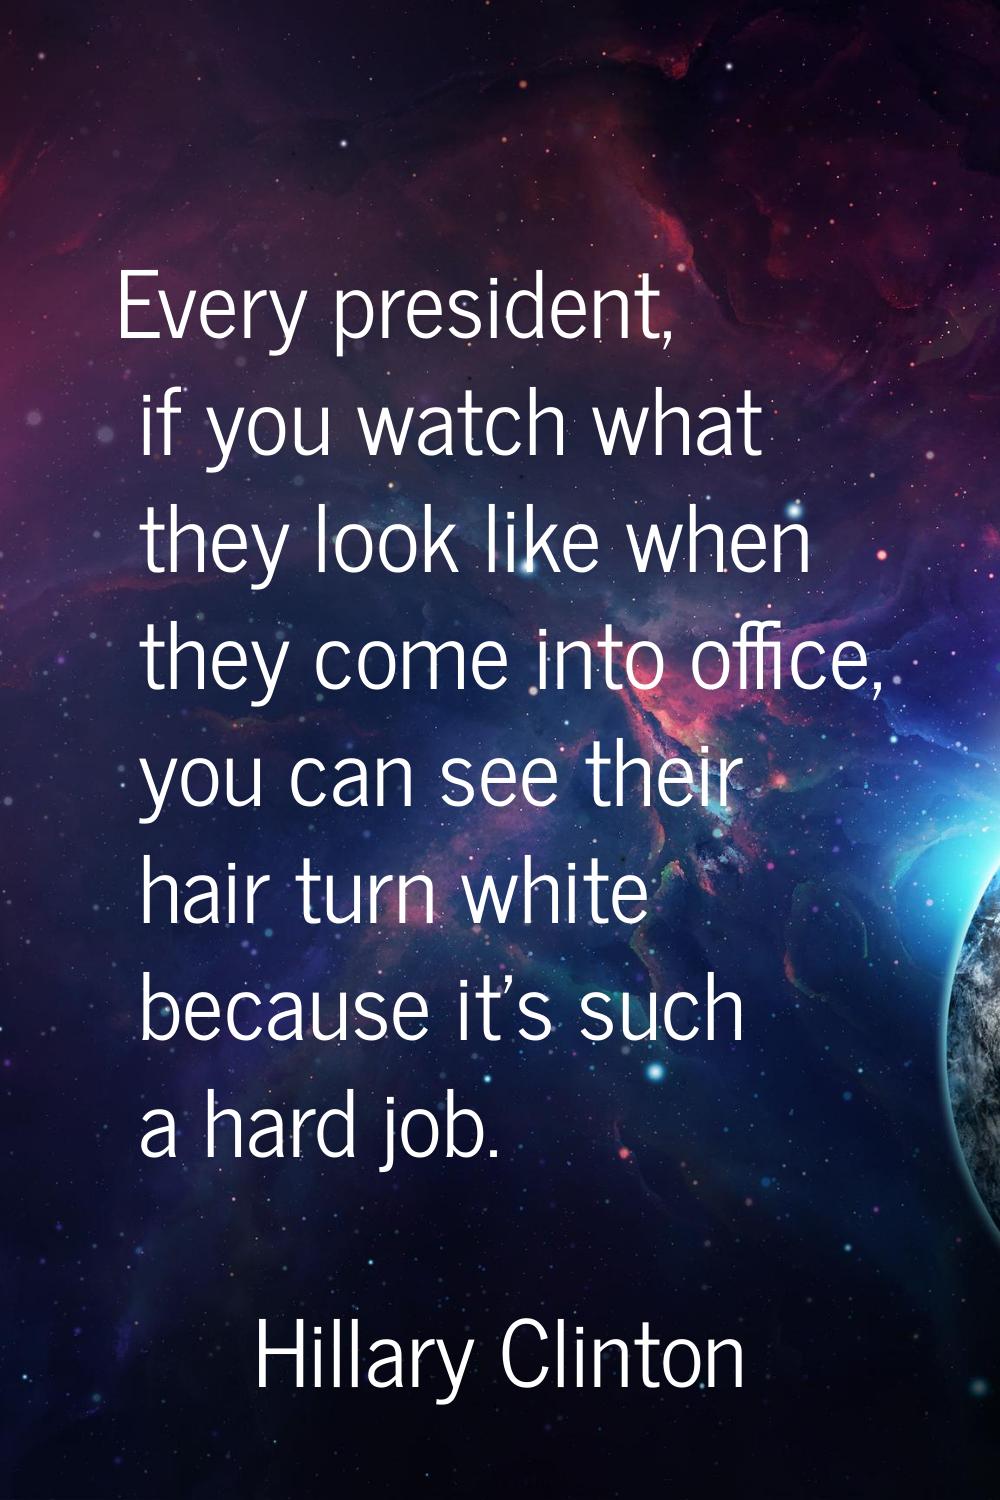 Every president, if you watch what they look like when they come into office, you can see their hai